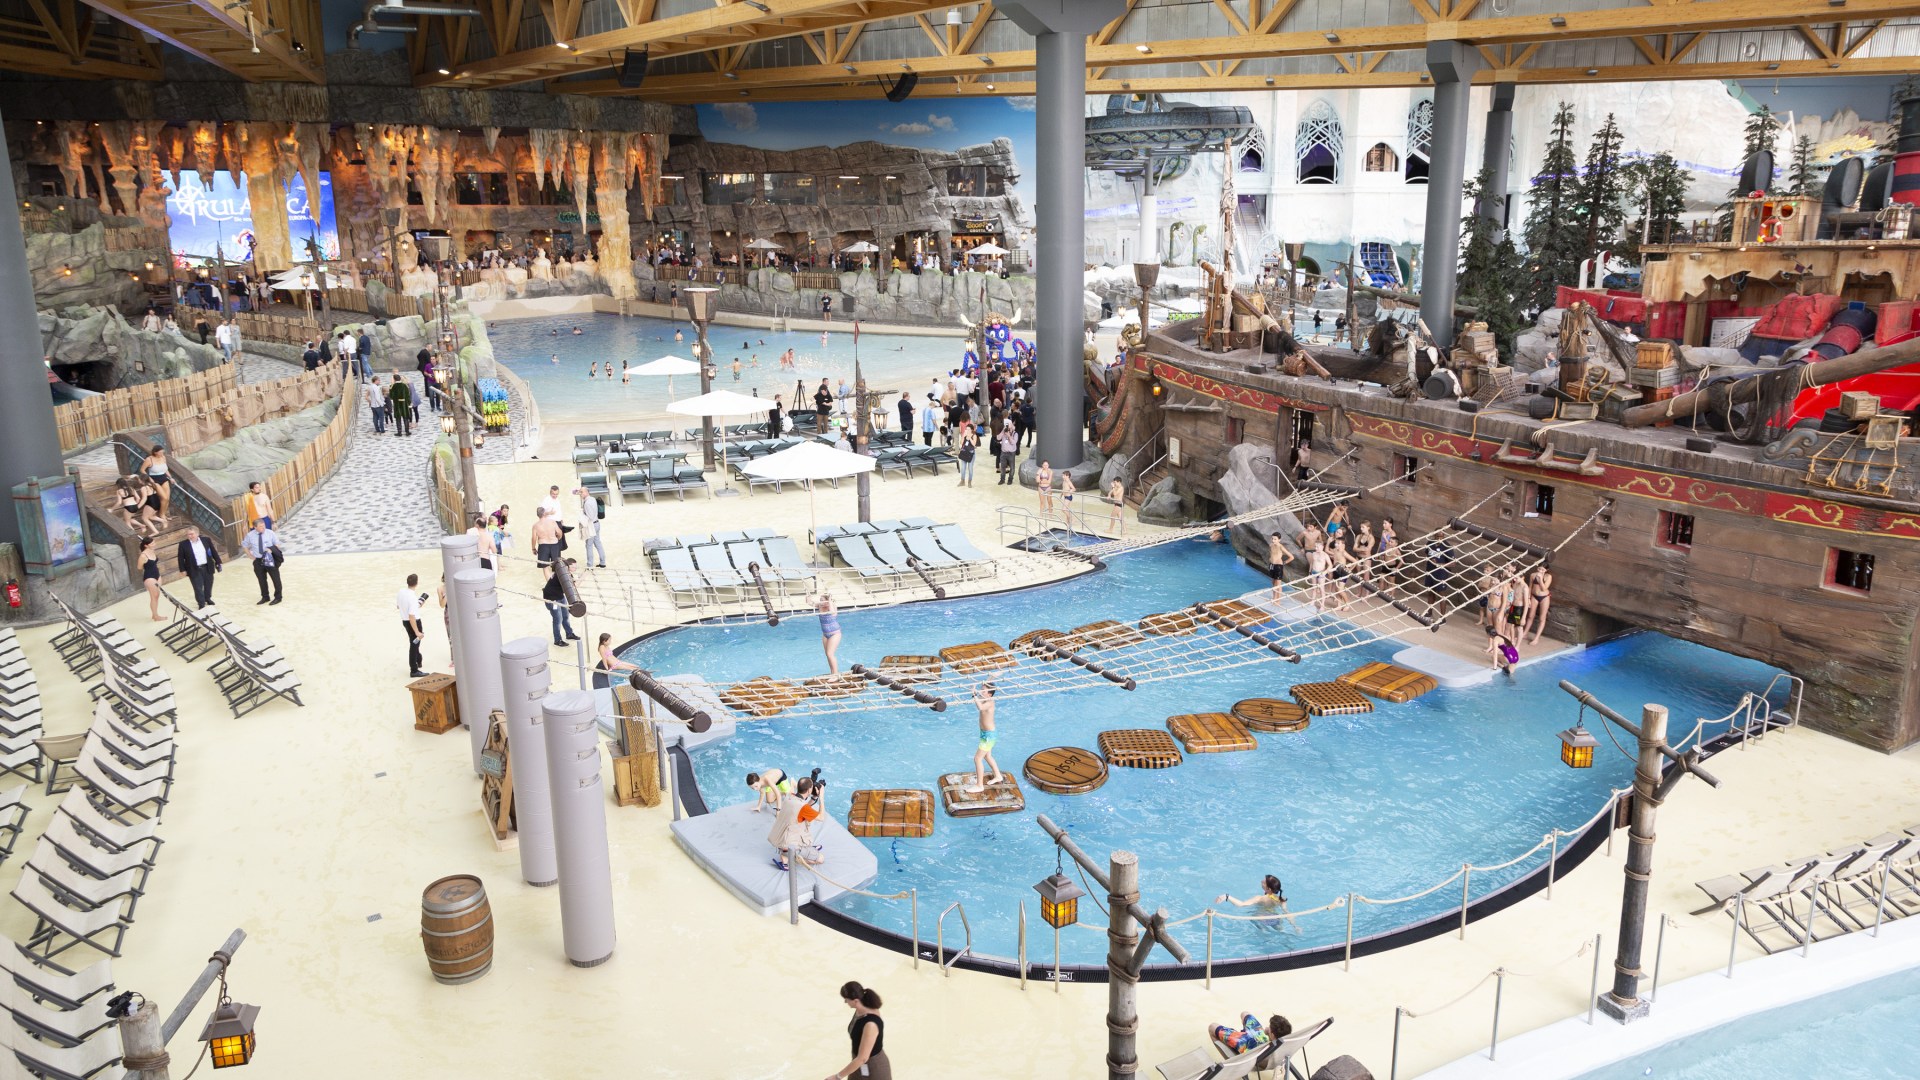 Five football fields in size, the European Waterpark features wave pools and DJ sets as well as a new ride.